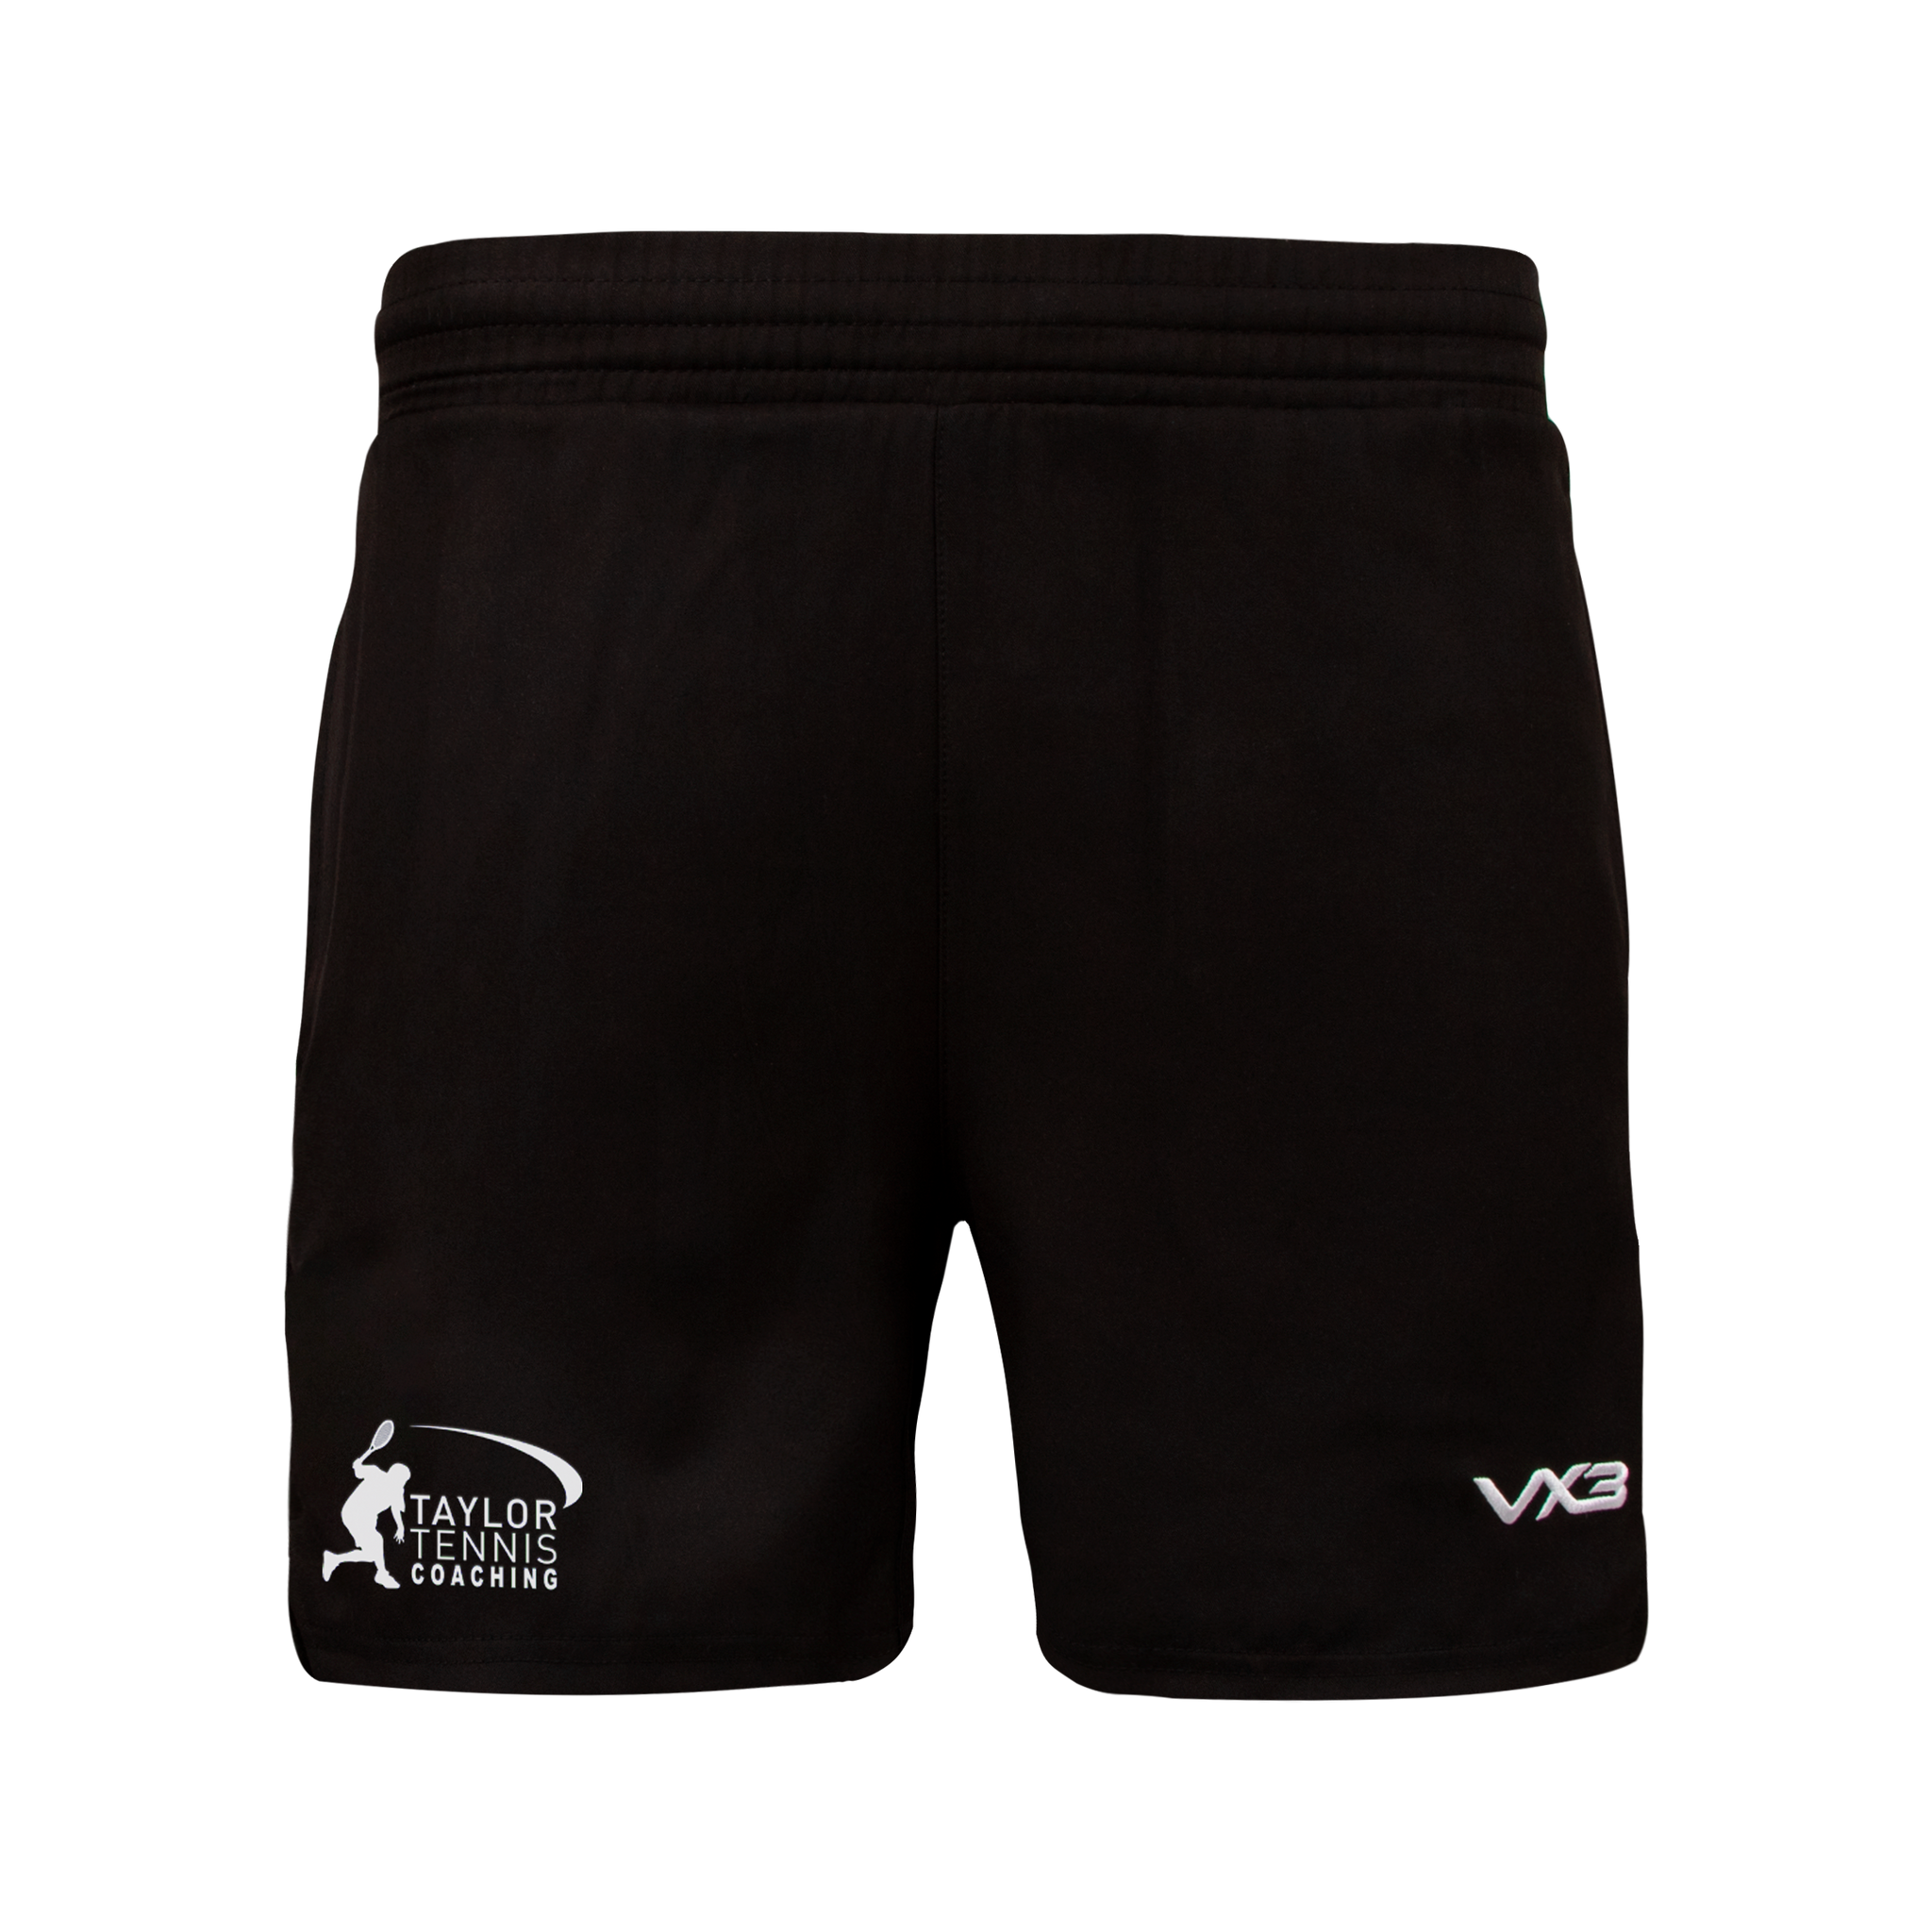 Taylor Tennis Coaching Ludus Youth Gym Short